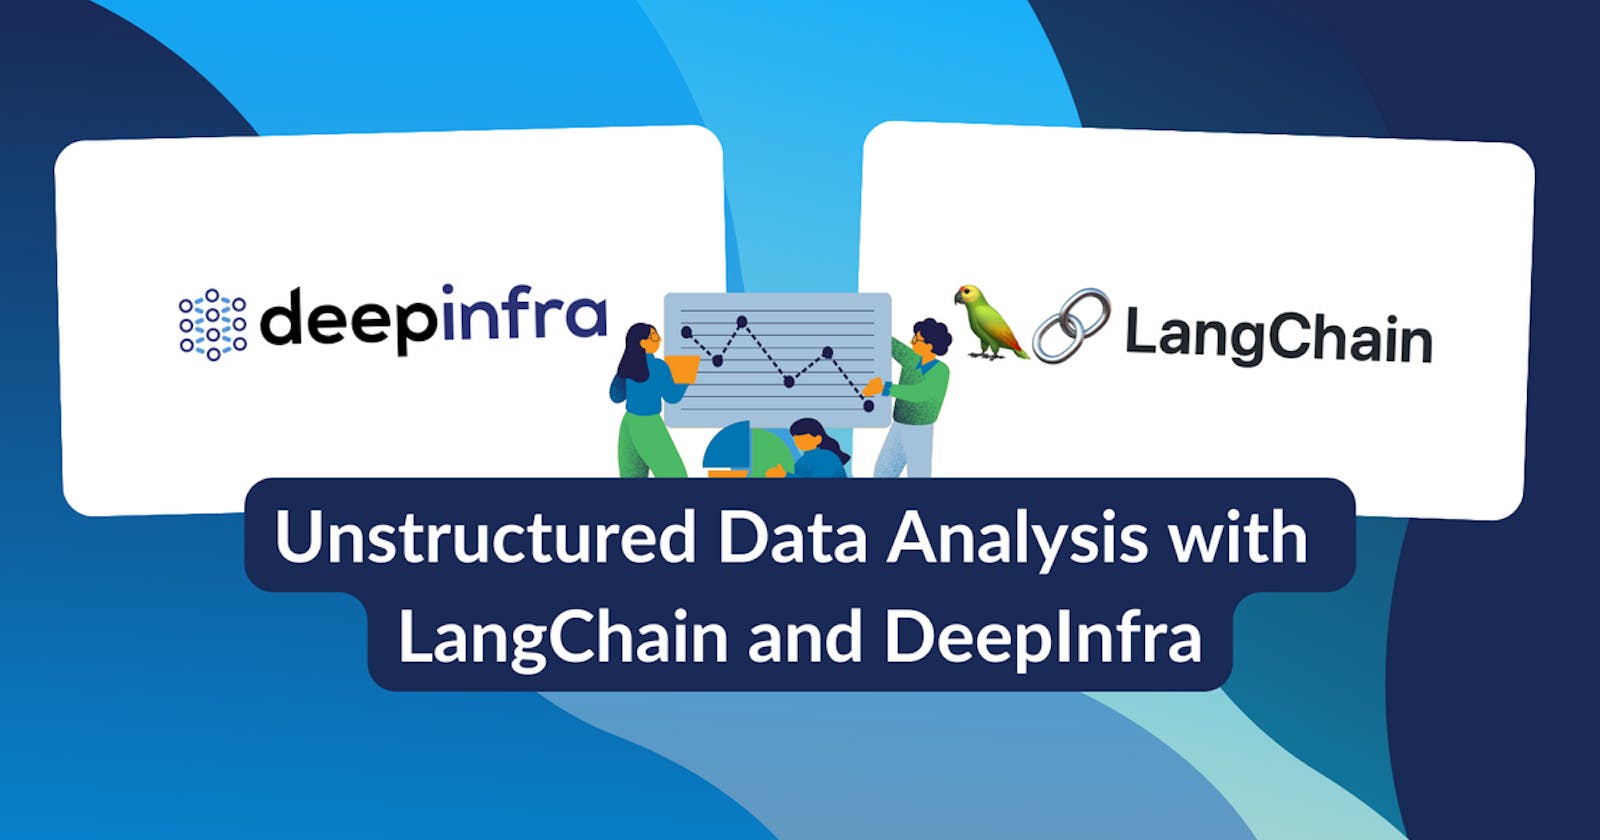 A Beginner's Guide to Unstructured Data Analysis with LangChain and DeepInfra